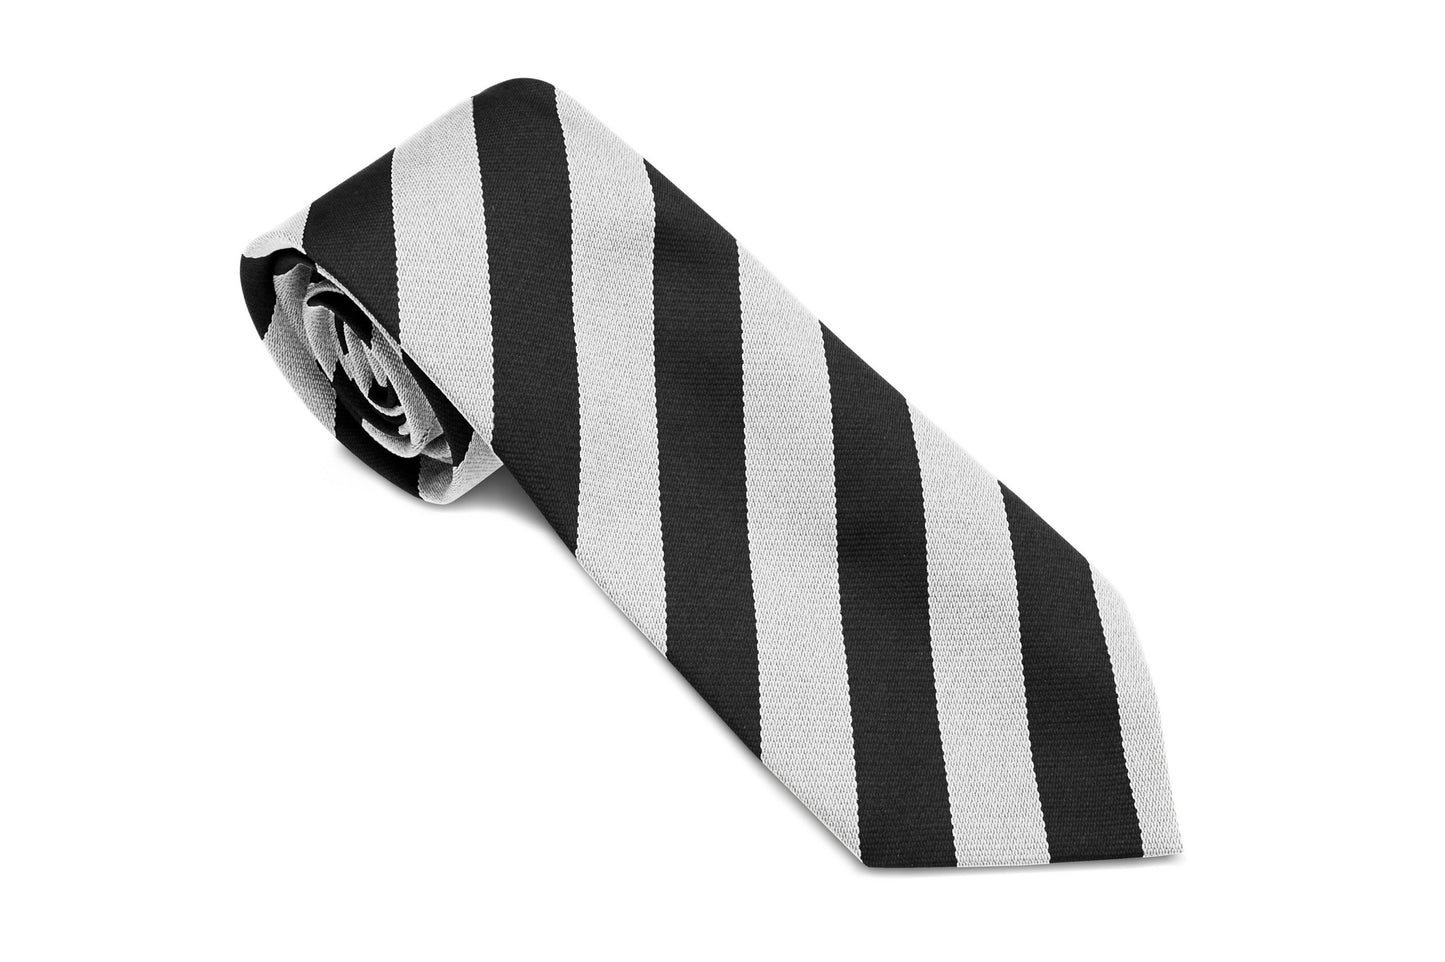 Stock Design Ties in Black and White Equal Stripe (5404-9501) - Lynendo Trade Store